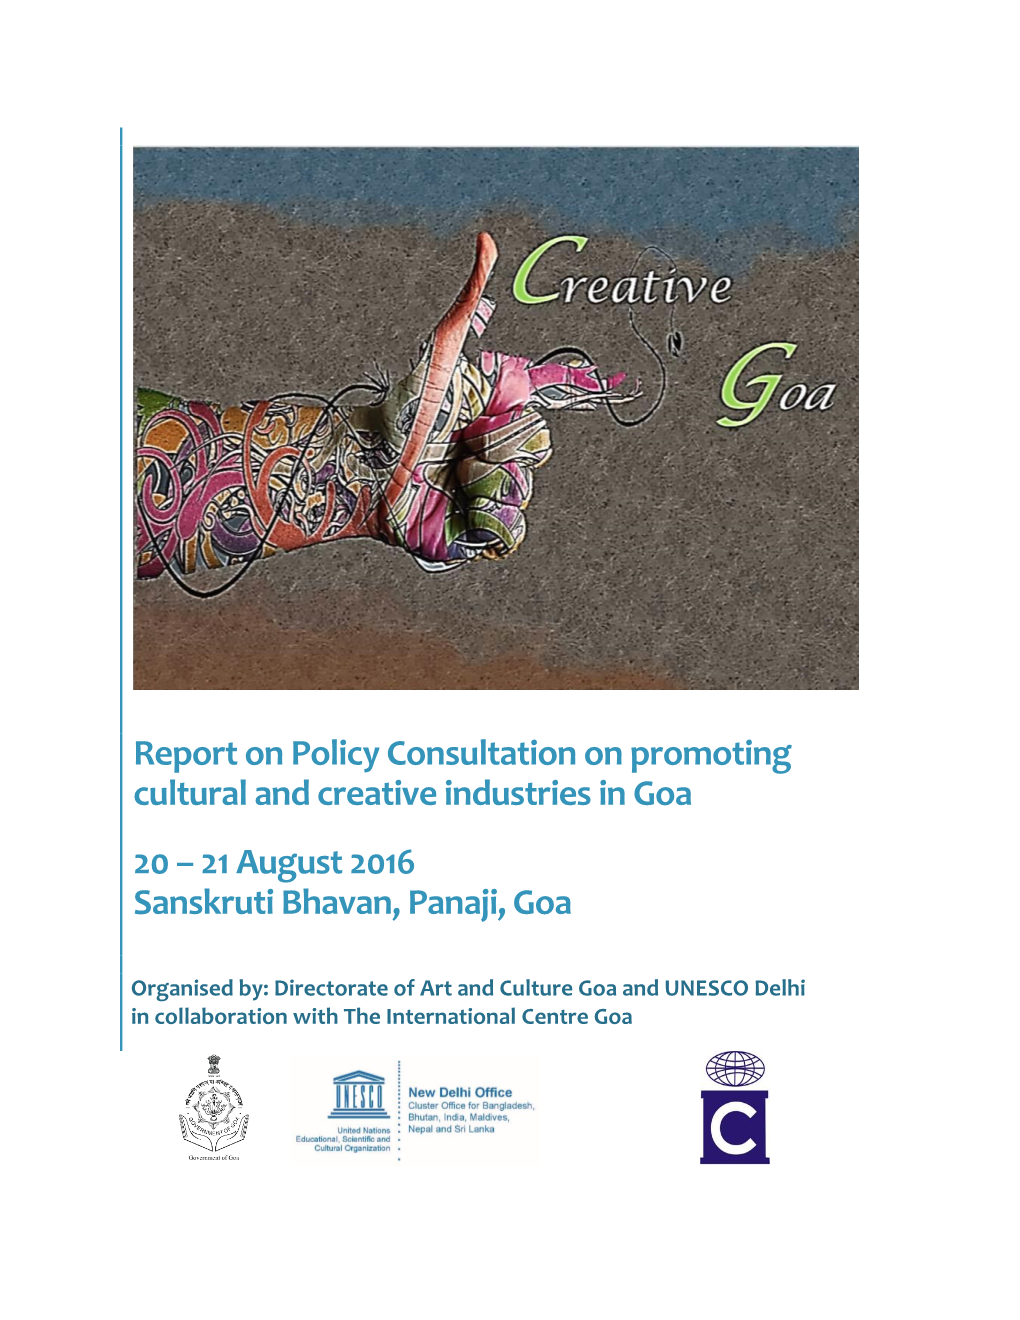 Report on Policy Consultation on Promoting Cultural and Creative Industries in Goa 20 – 21 August 2016 Sanskruti Bhavan, Panaji, Goa